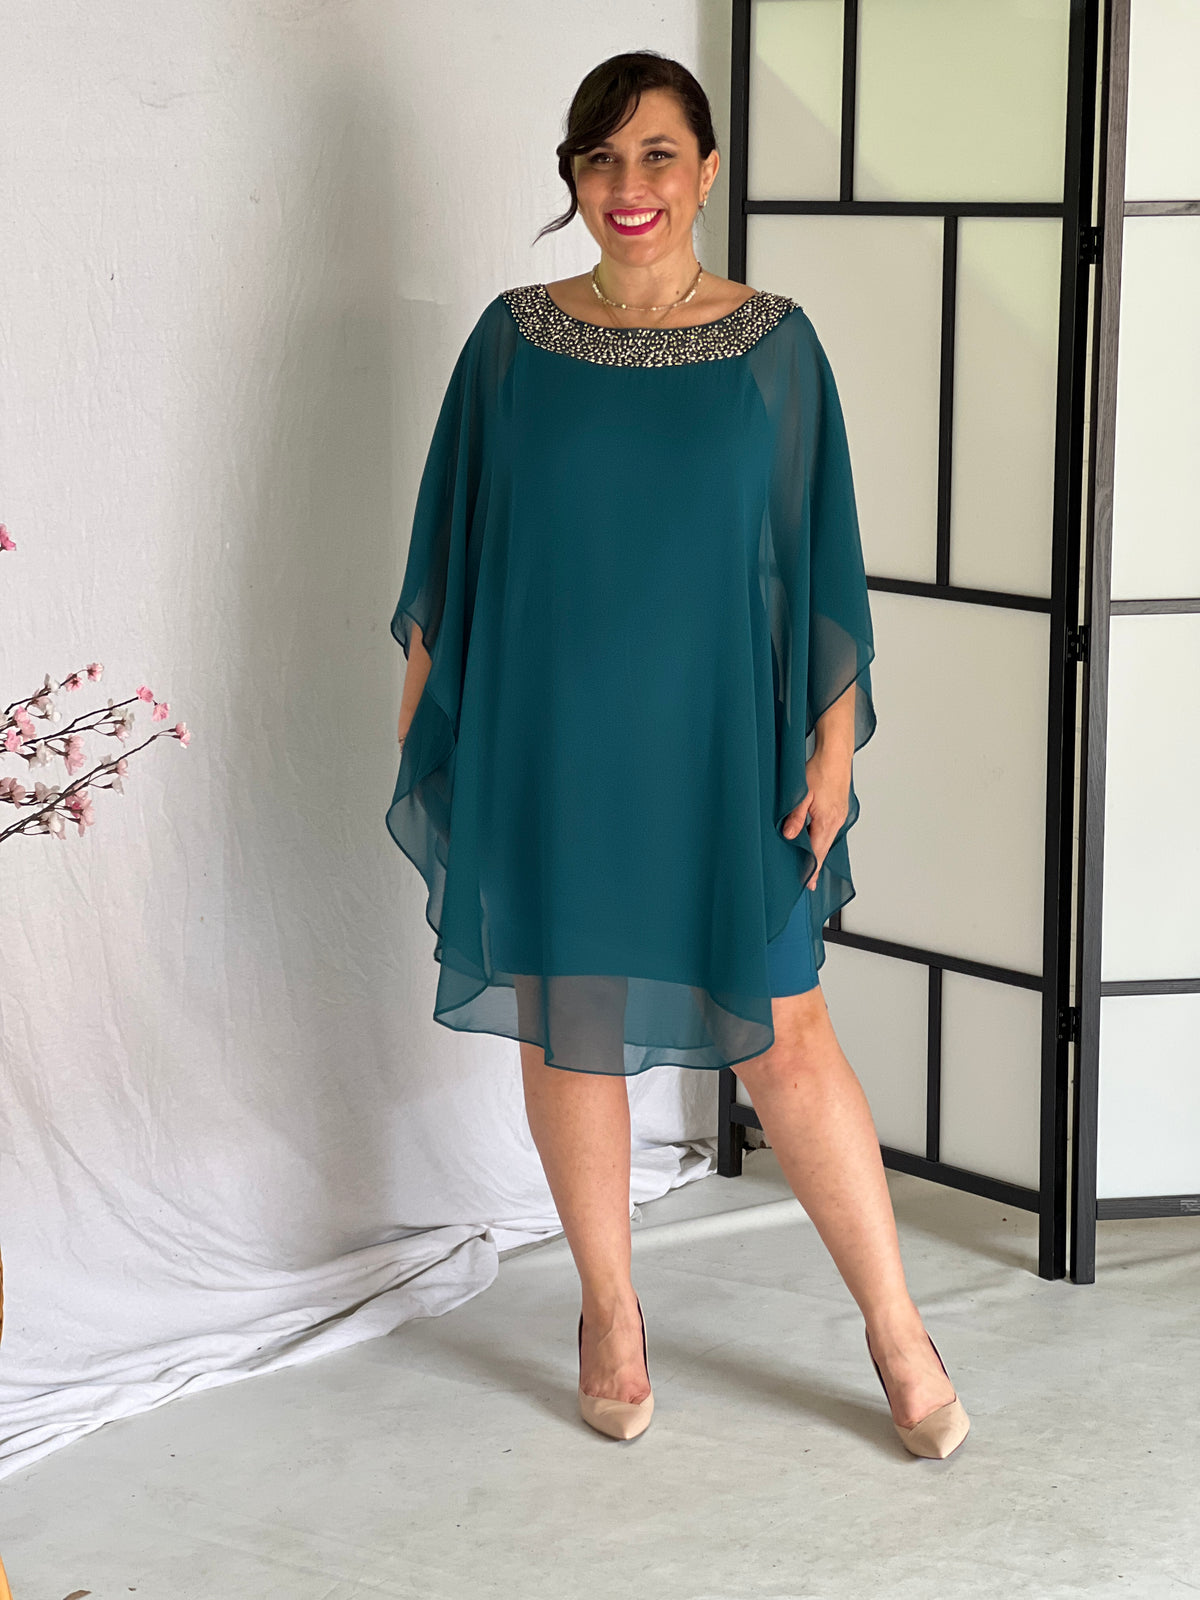 20+ Teal Mother Of The Bride Dress